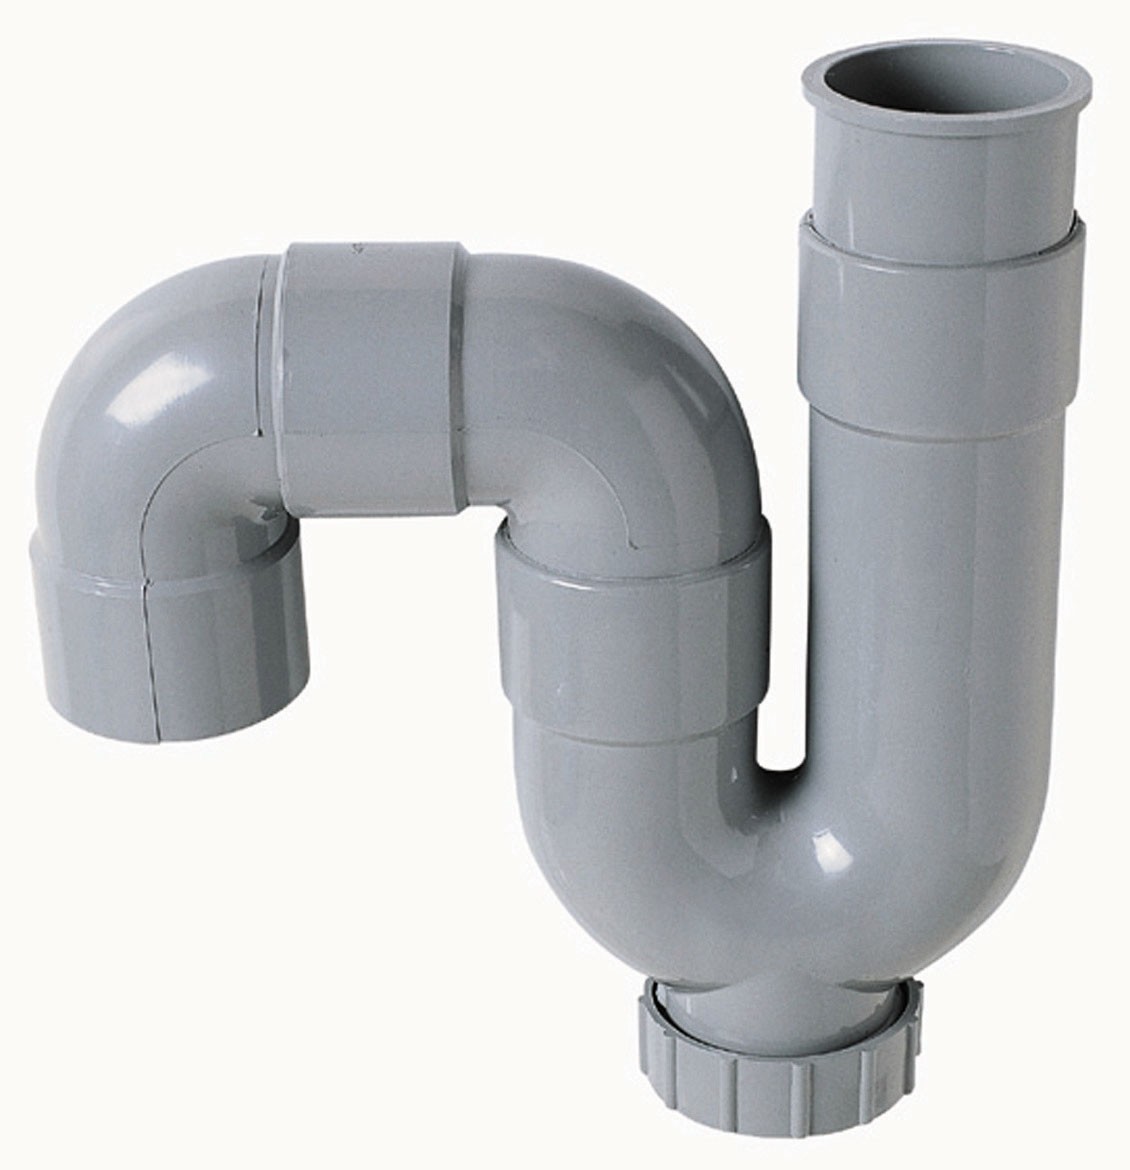 Siphon PVC WIRQUIN